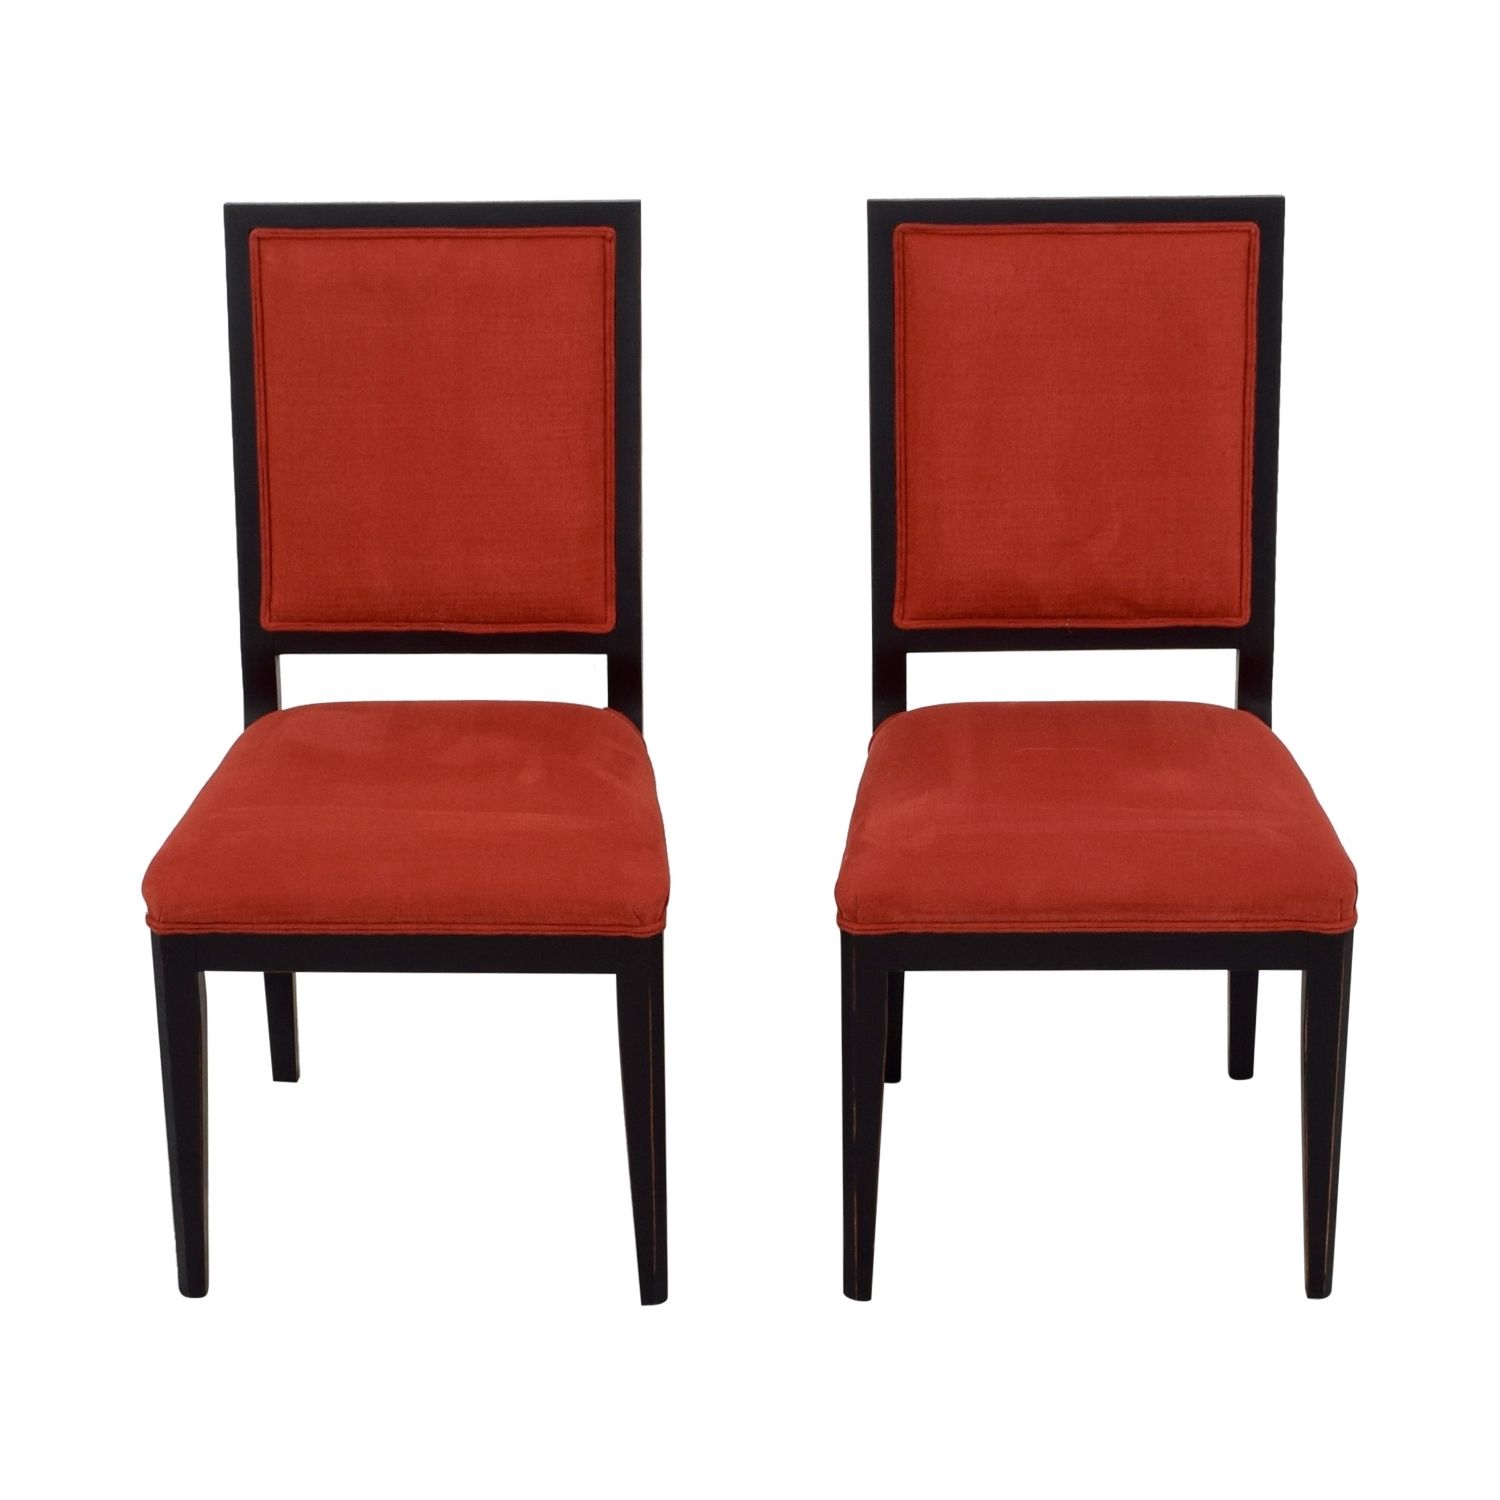 [%90% Off – Buying And Design Buying And Design Red Upholstered Dining Intended For Widely Used Red Dining Chairs|red Dining Chairs With Regard To Recent 90% Off – Buying And Design Buying And Design Red Upholstered Dining|2018 Red Dining Chairs Inside 90% Off – Buying And Design Buying And Design Red Upholstered Dining|most Current 90% Off – Buying And Design Buying And Design Red Upholstered Dining Inside Red Dining Chairs%] (View 19 of 25)